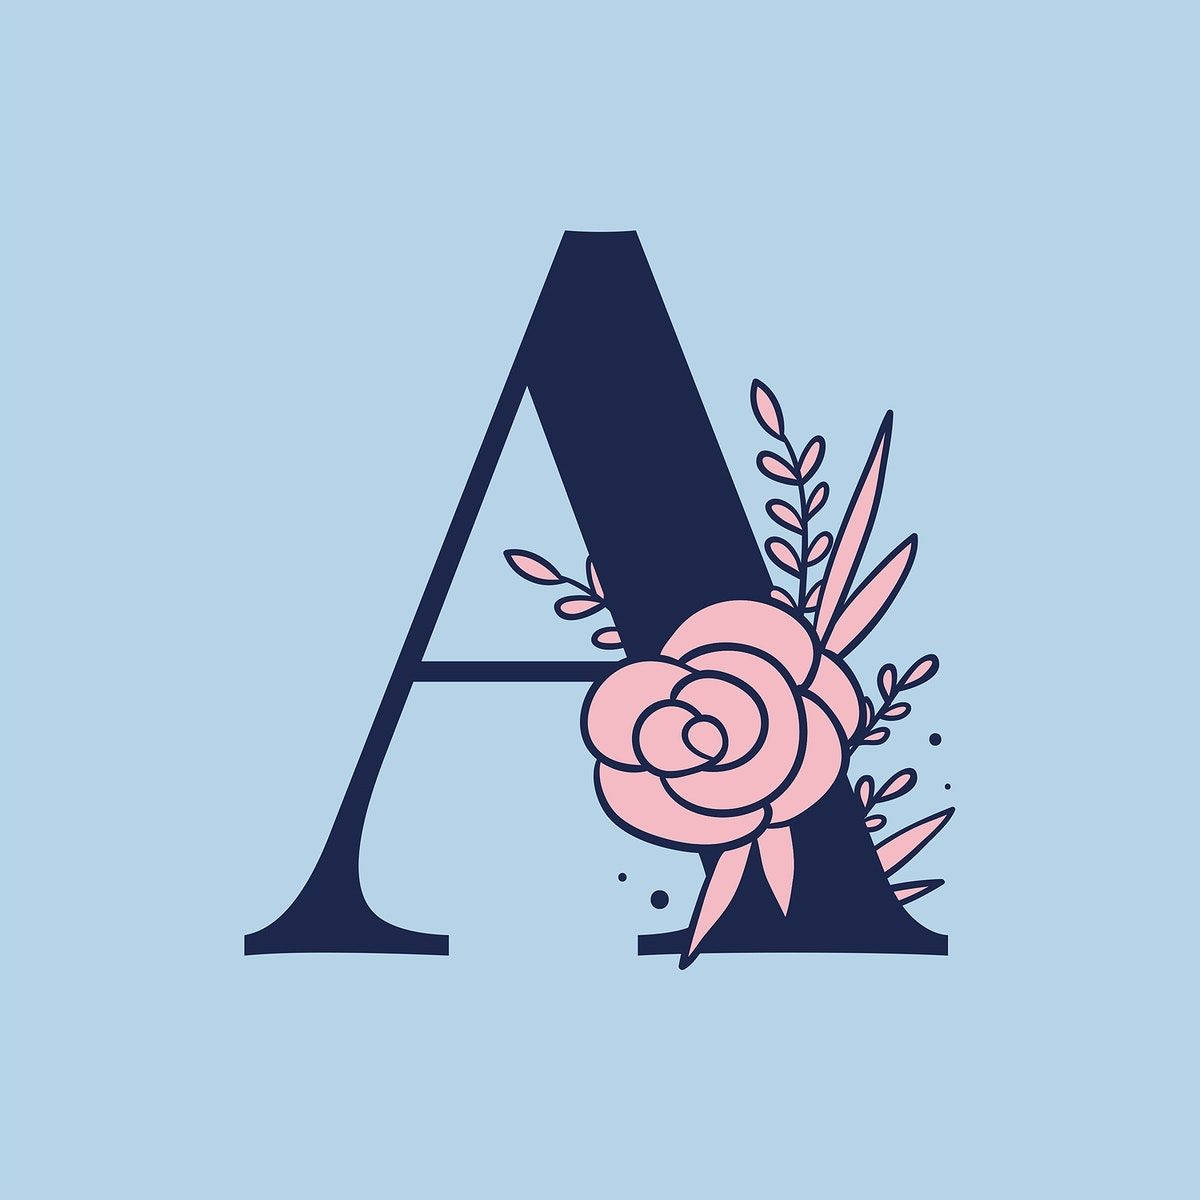 Blue Capital Alphabet Letter A With Pink Flower Background